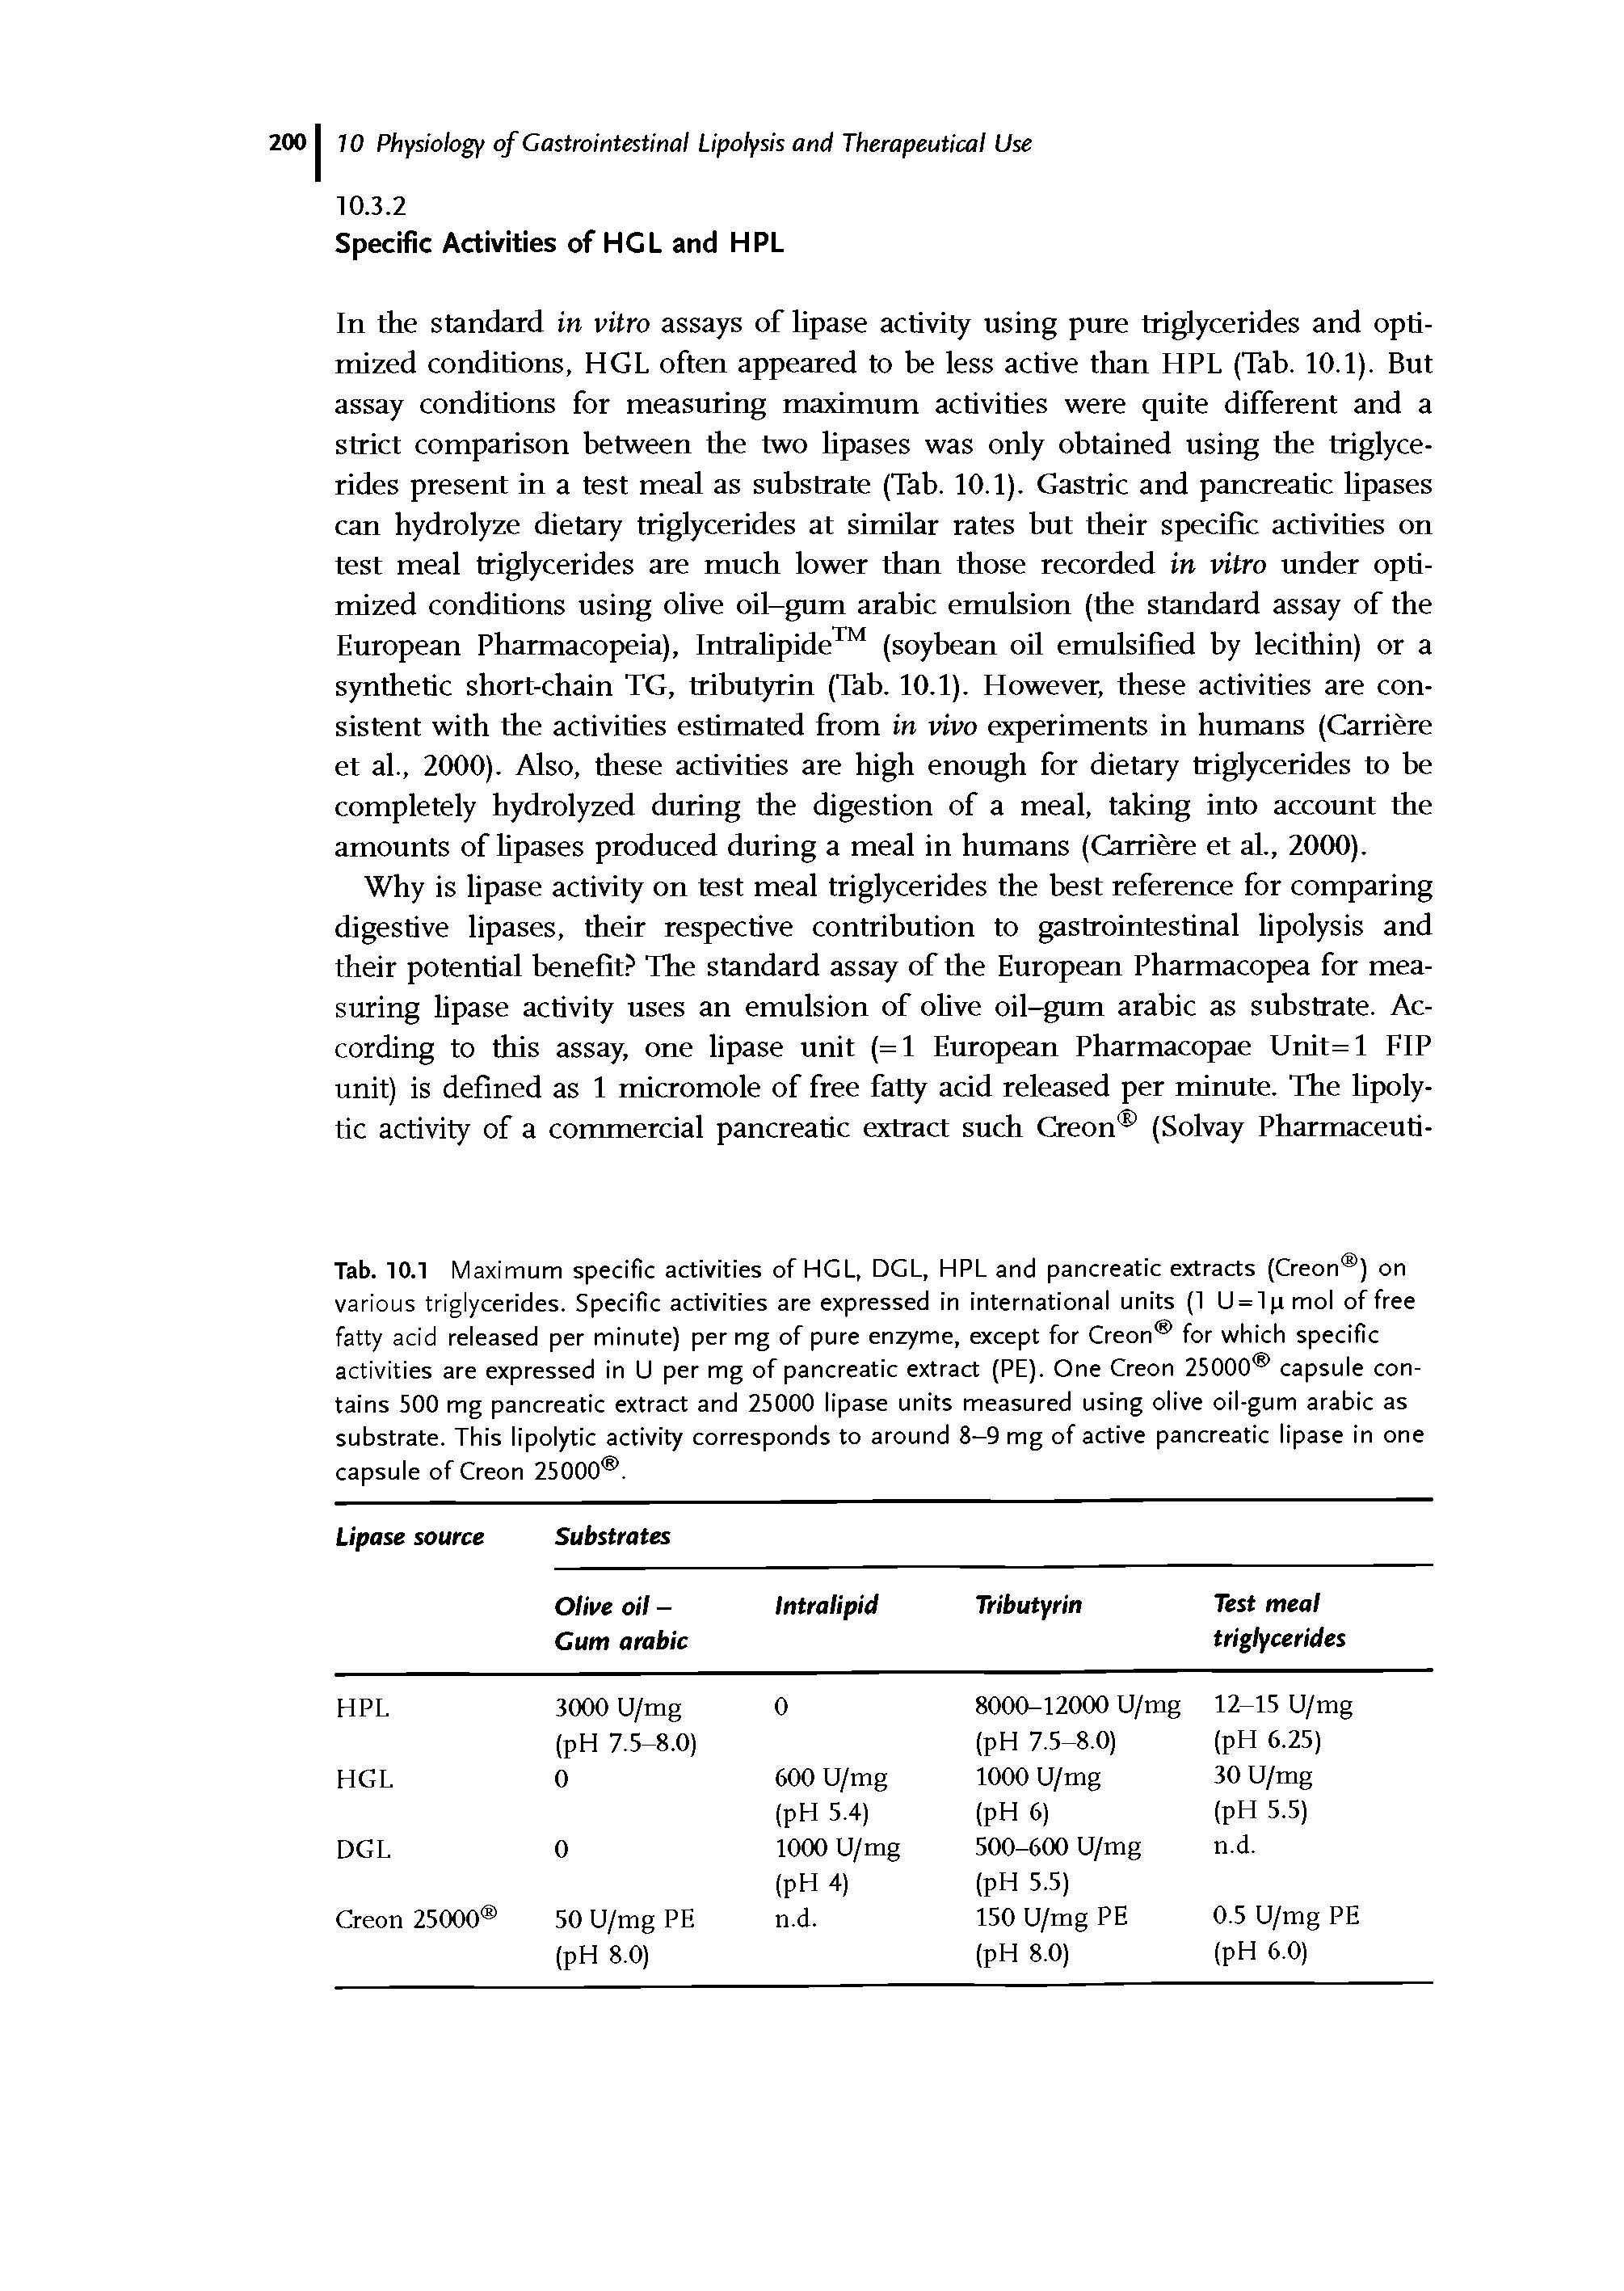 Tab. 10.1 Maximum specific activities of HGL, DGL, HPL and pancreatic extracts (Creon ) on various triglycerides. Specific activities are expressed in international units (1 LJ = lpmol of free fatty acid released per minute) per mg of pure enzyme, except for Creon for which specific activities are expressed in U per mg of pancreatic extract (PE). One Creon 25000 capsule contains 500 mg pancreatic extract and 25000 lipase units measured using olive oil-gum arabic as substrate. This lipolytic activity corresponds to around 8-9 mg of active pancreatic lipase in one capsule of Creon 25000 .